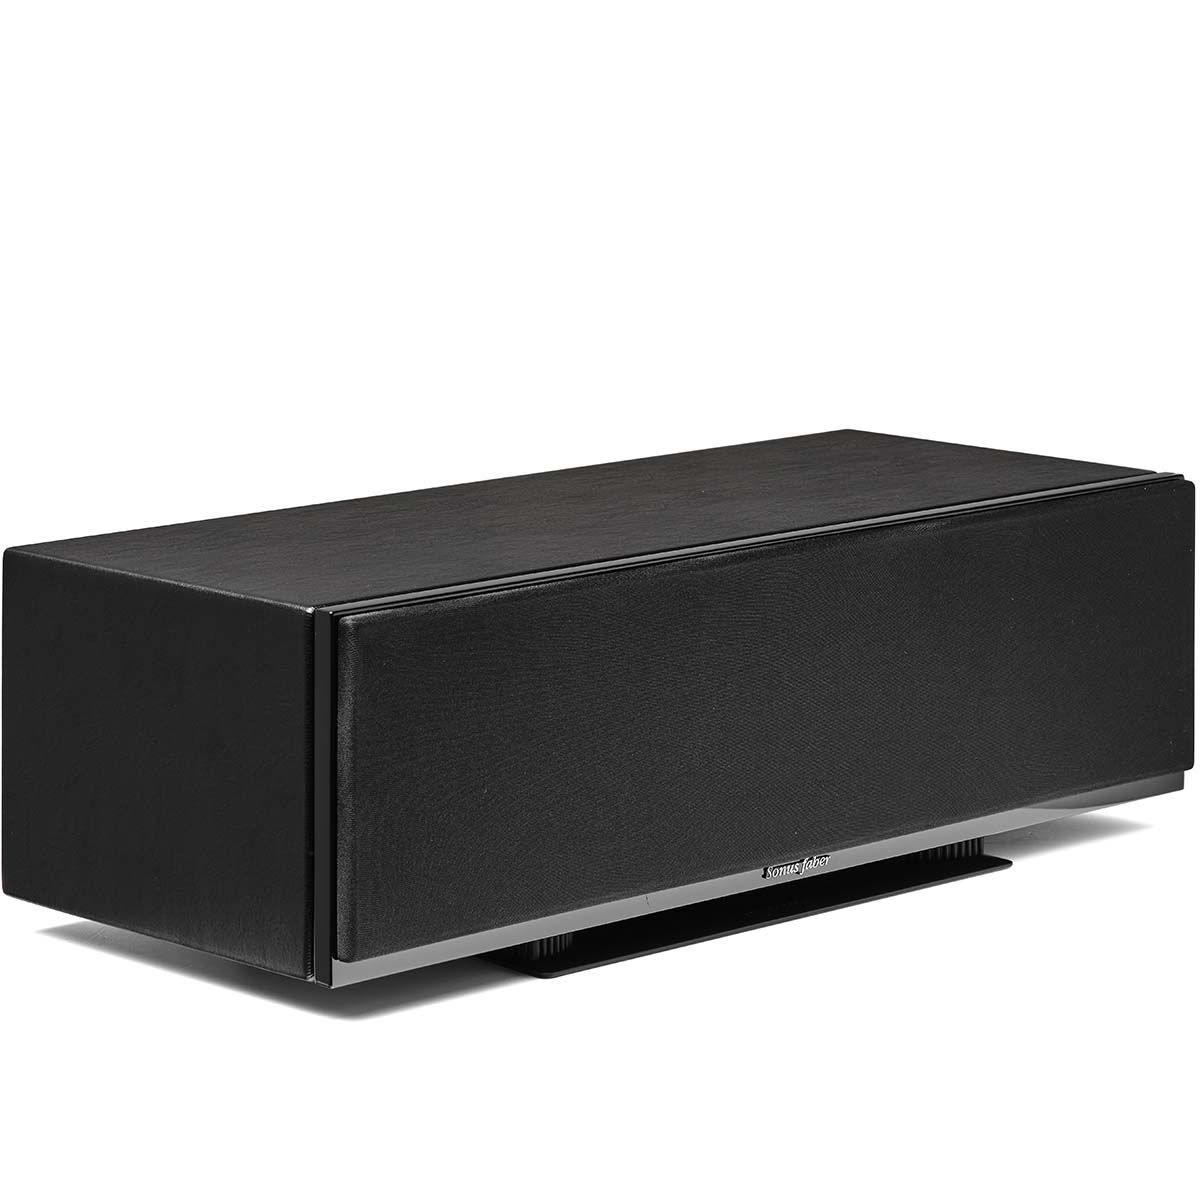 Sonus Faber Lumina Center Channel Speaker - Black - angled front view with grille